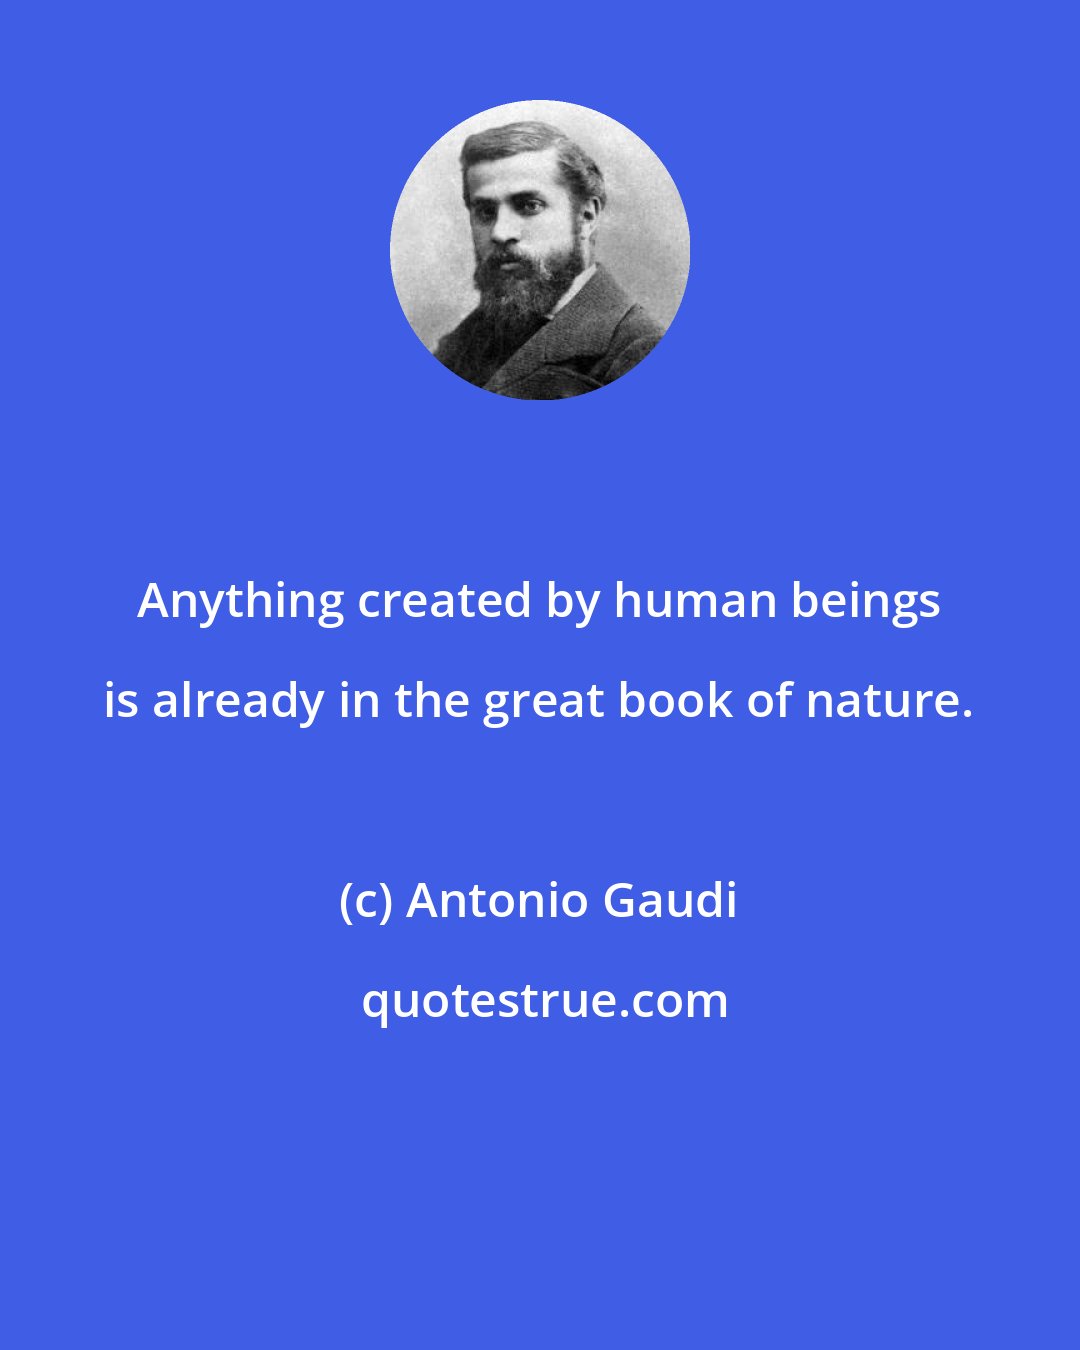 Antonio Gaudi: Anything created by human beings is already in the great book of nature.